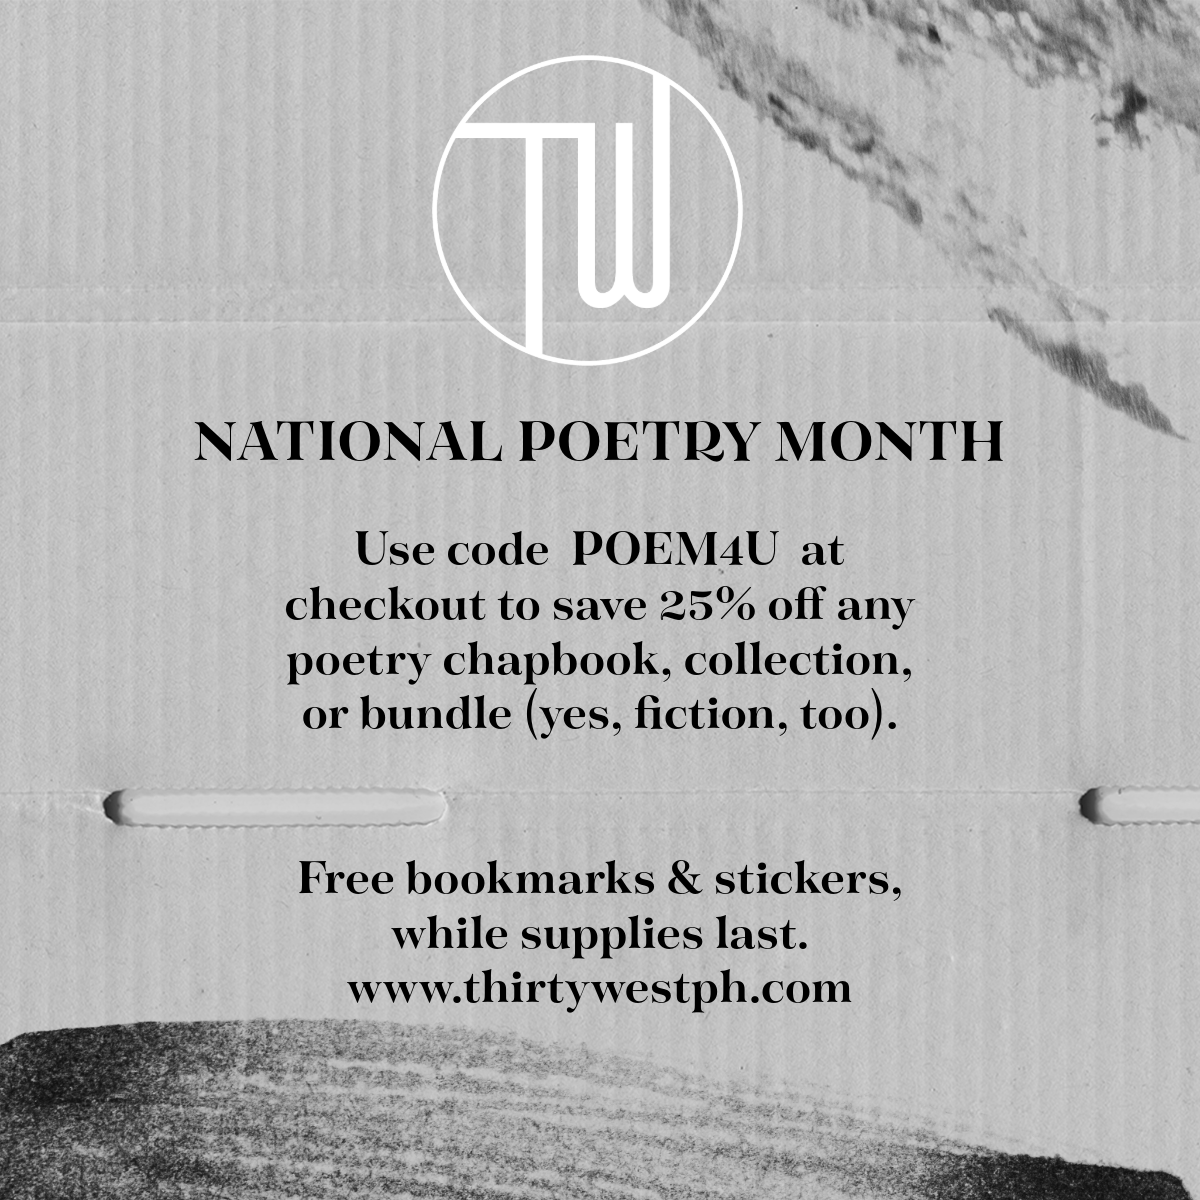 POEM4U 25% off all poetry titles (chapbooks, books, bundles) All month Poetry for the people thirtywestph.com/shop